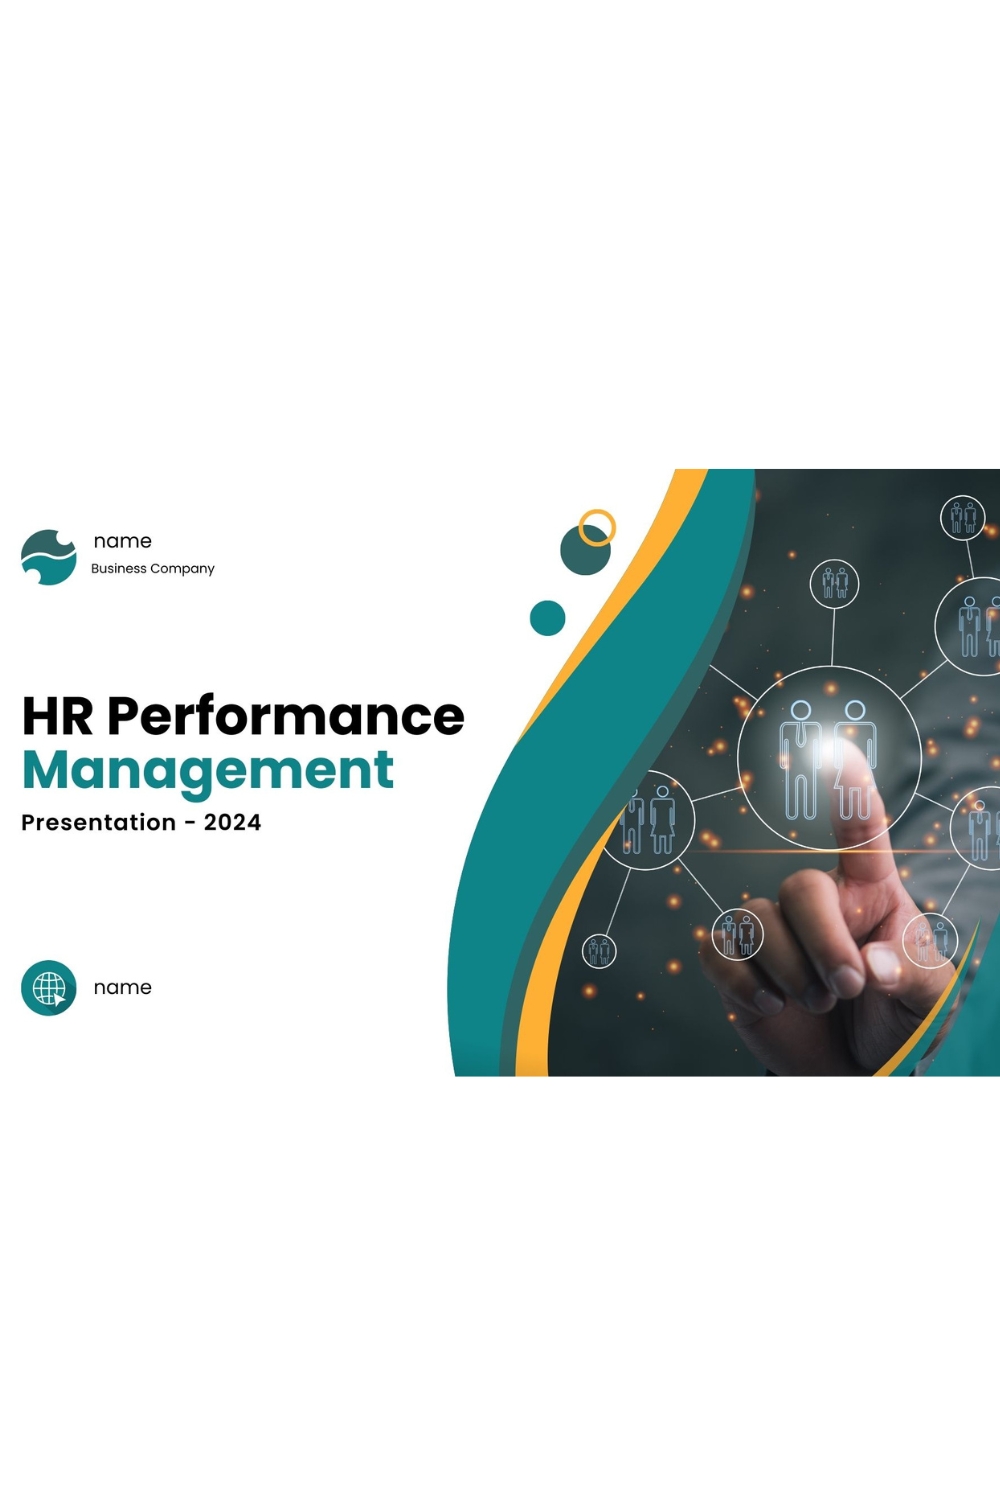 HR Performance Management for 2024 templates pinterest preview image.